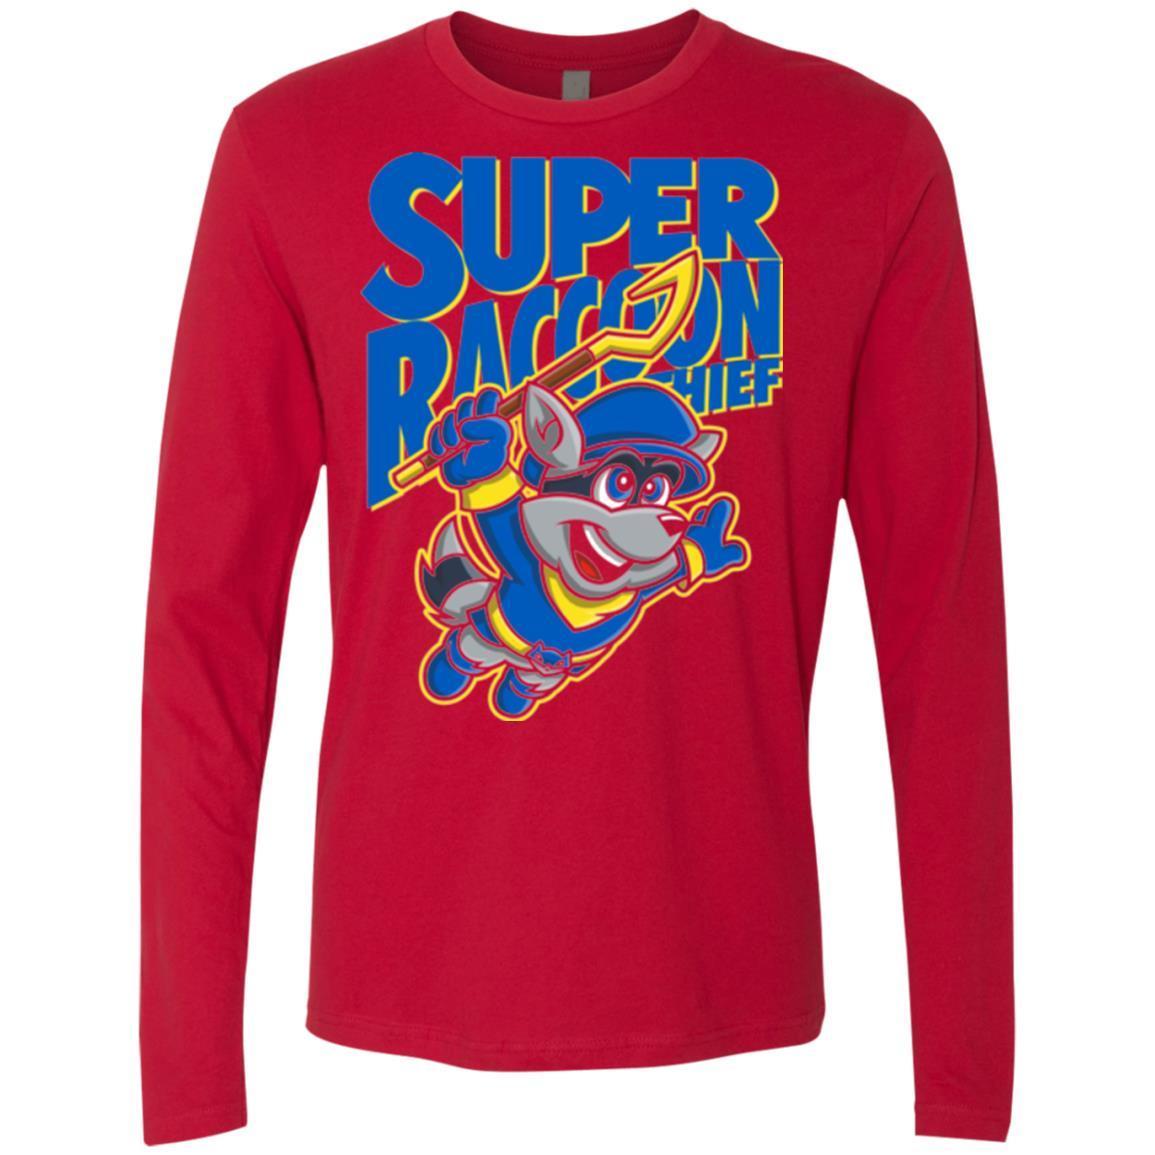 T-Shirts Red / Small Super Racoon Thief Men's Premium Long Sleeve